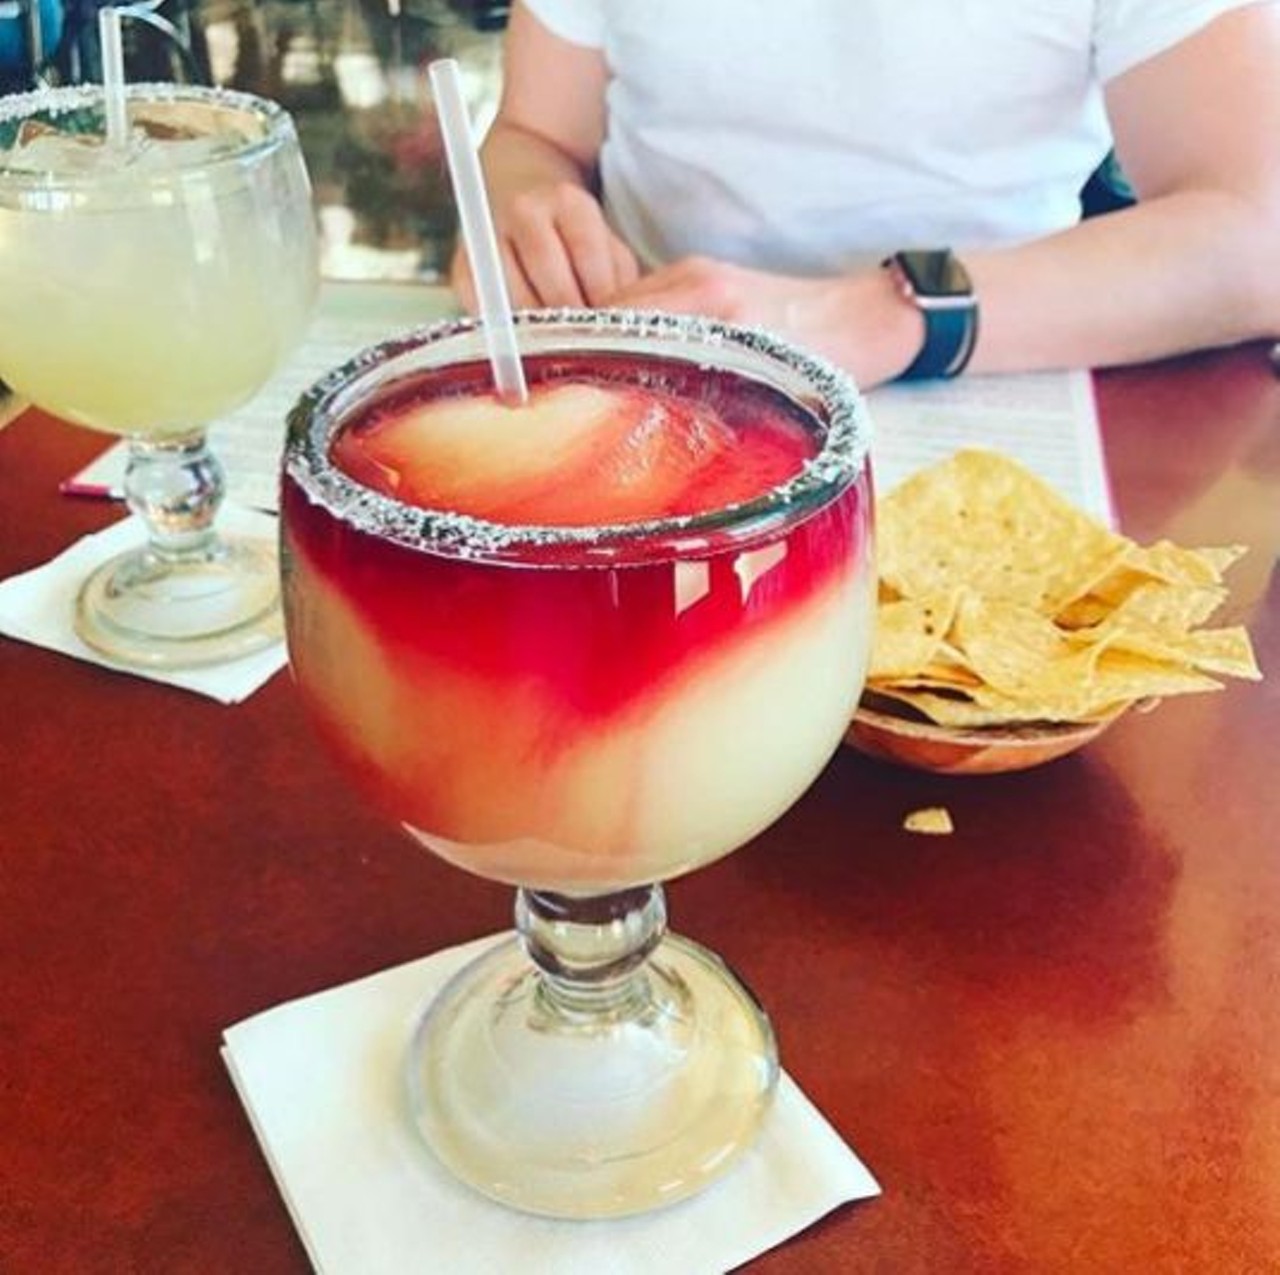 Rosario&#146;s Mexican Cafe y Cantina 
910 S. Alamo St., (210) 223-1806 
At Rosario&#146;s you can have your two favorite drinks &#150; margarita and sangria &#150; mixed into one tasty drink. 
Photo via Instagram, rosariossa